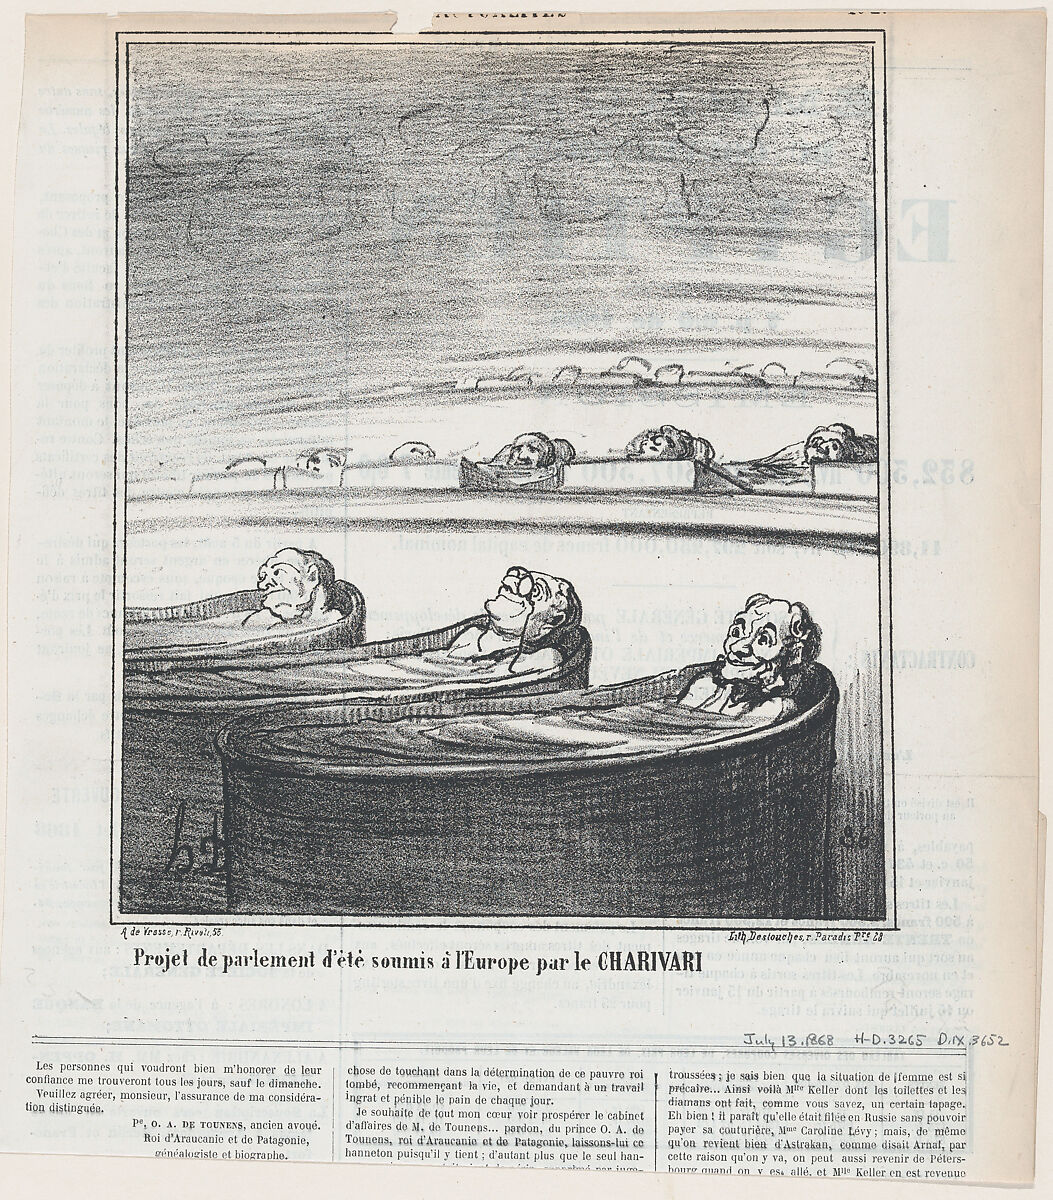 Idea for summer parliament submitted to Europe by the Charivari, from 'News of the day,' published in Le Charivari, July 13, 1868, Honoré Daumier (French, Marseilles 1808–1879 Valmondois), Lithograph on newsprint; second state of two (Delteil) 